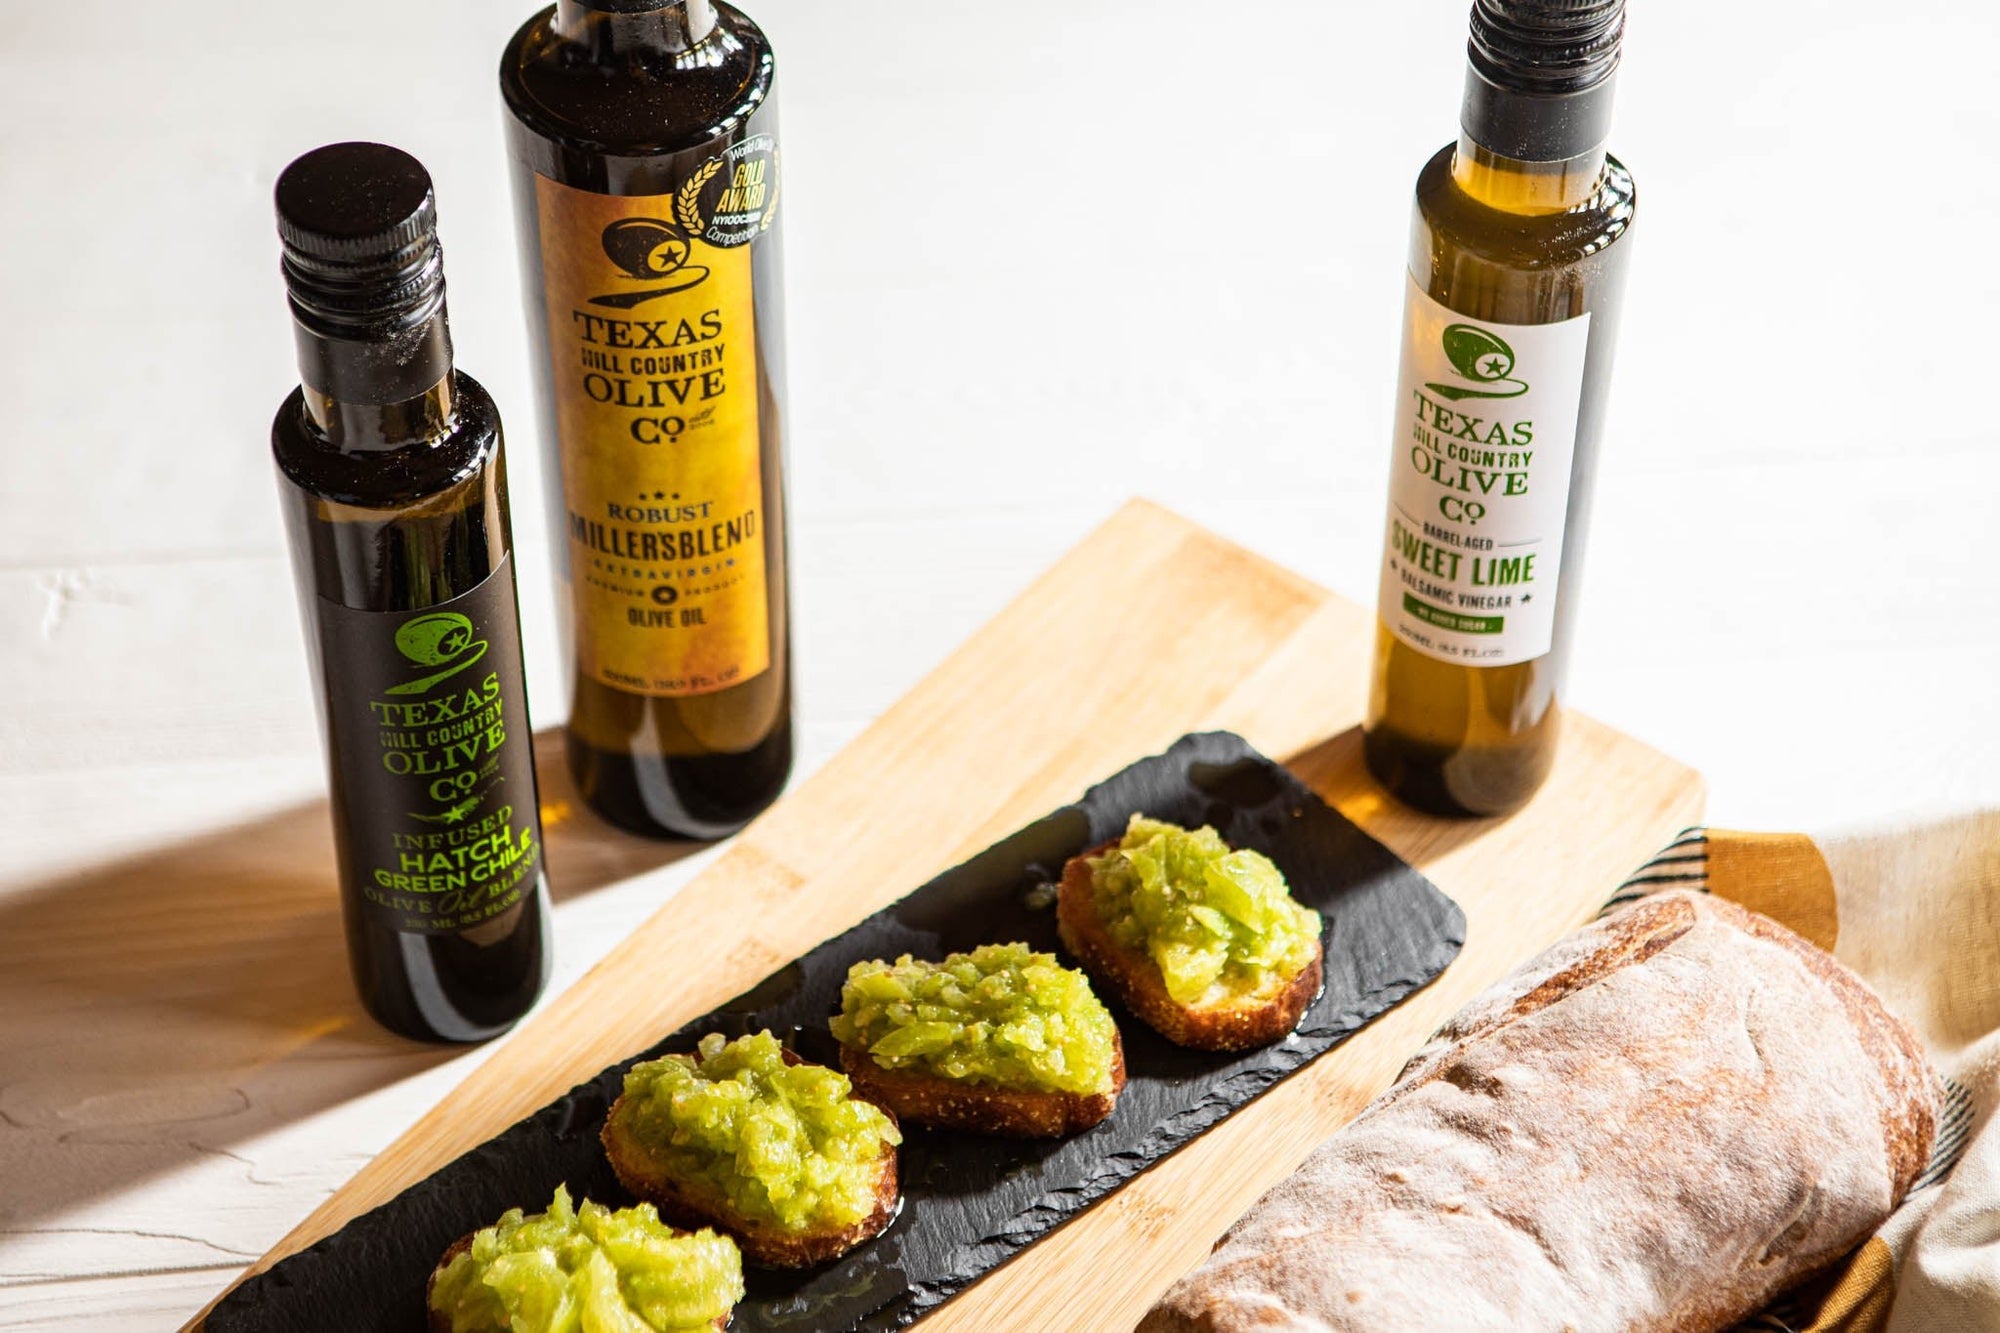 Texas Olive Oil - Which is Best for Cooking? - Texas Hill Country Olive Co.